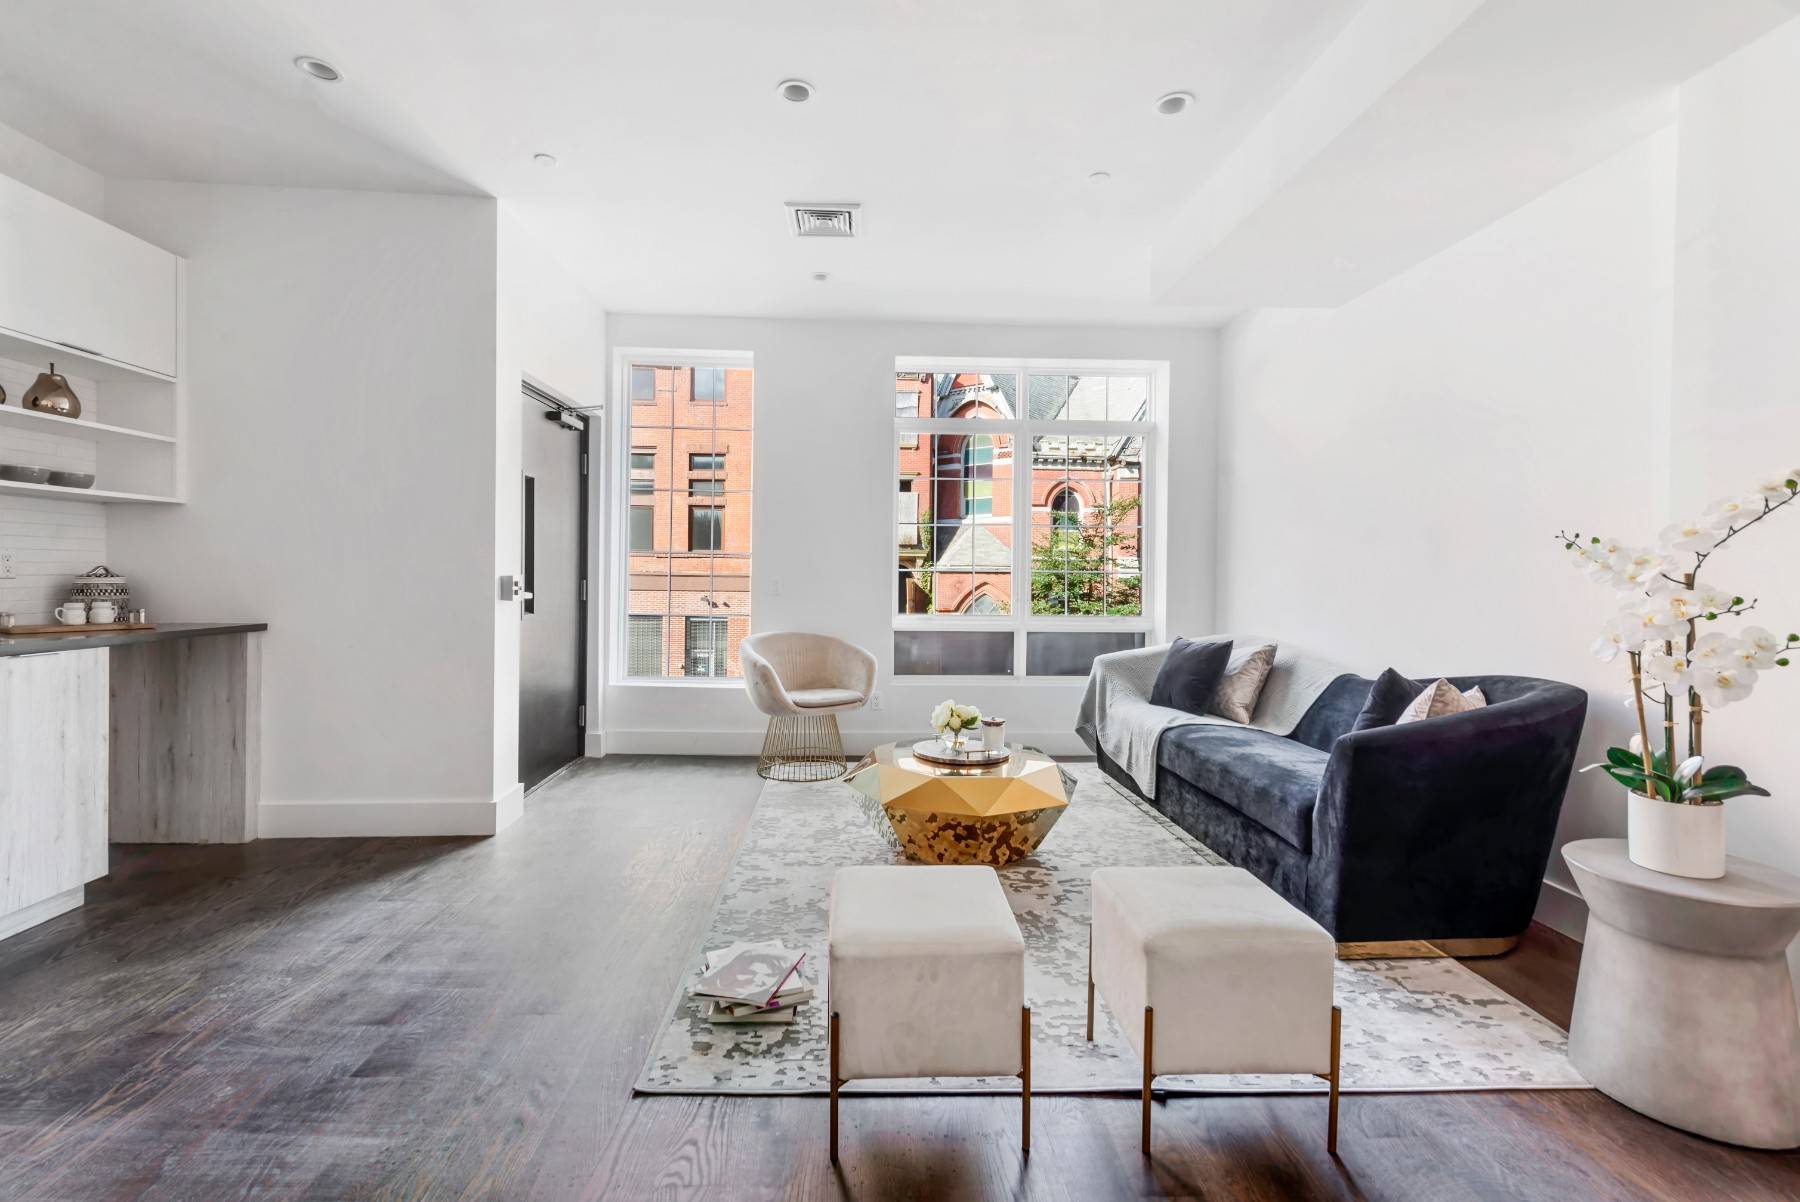 335 341 NOSTRAND OFFERS 15 YEAR TAX ABATEMENTLuxury living in trendy, up and coming Brooklyn !